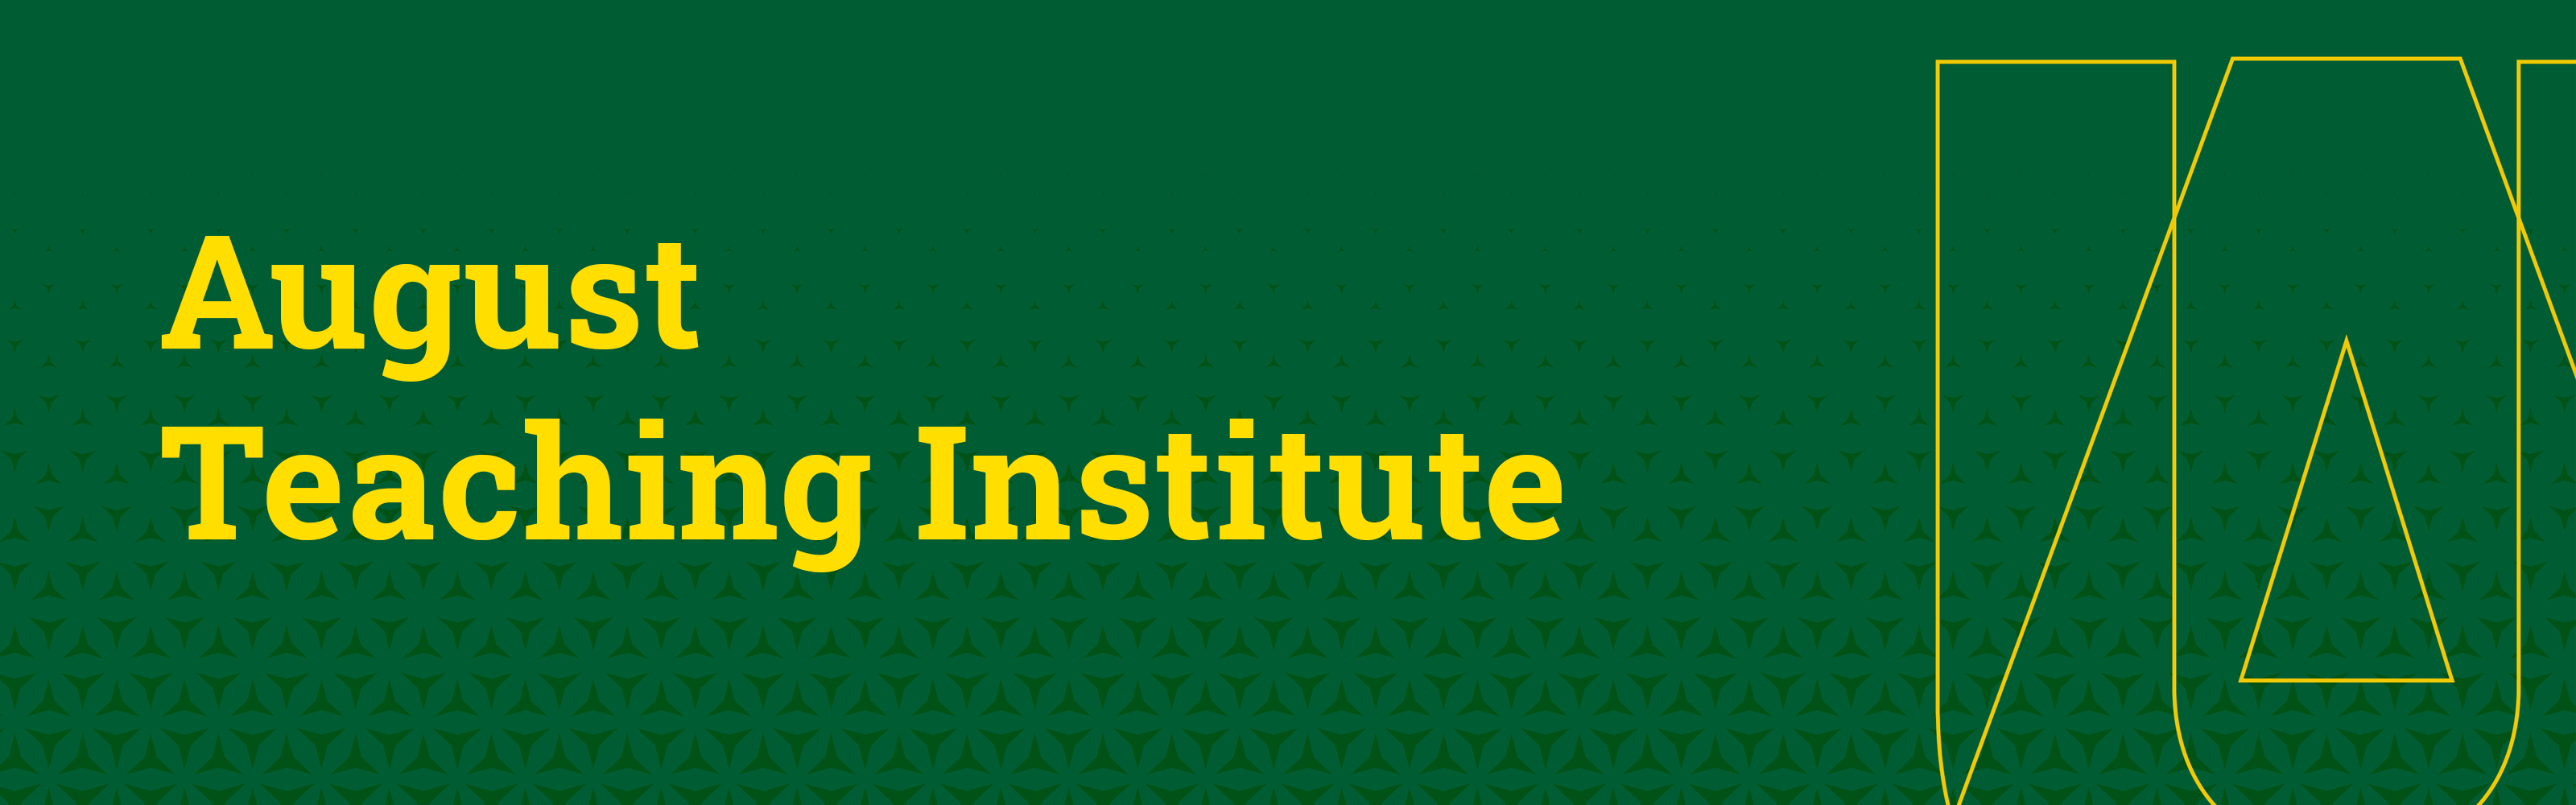 august-teaching-institute.png